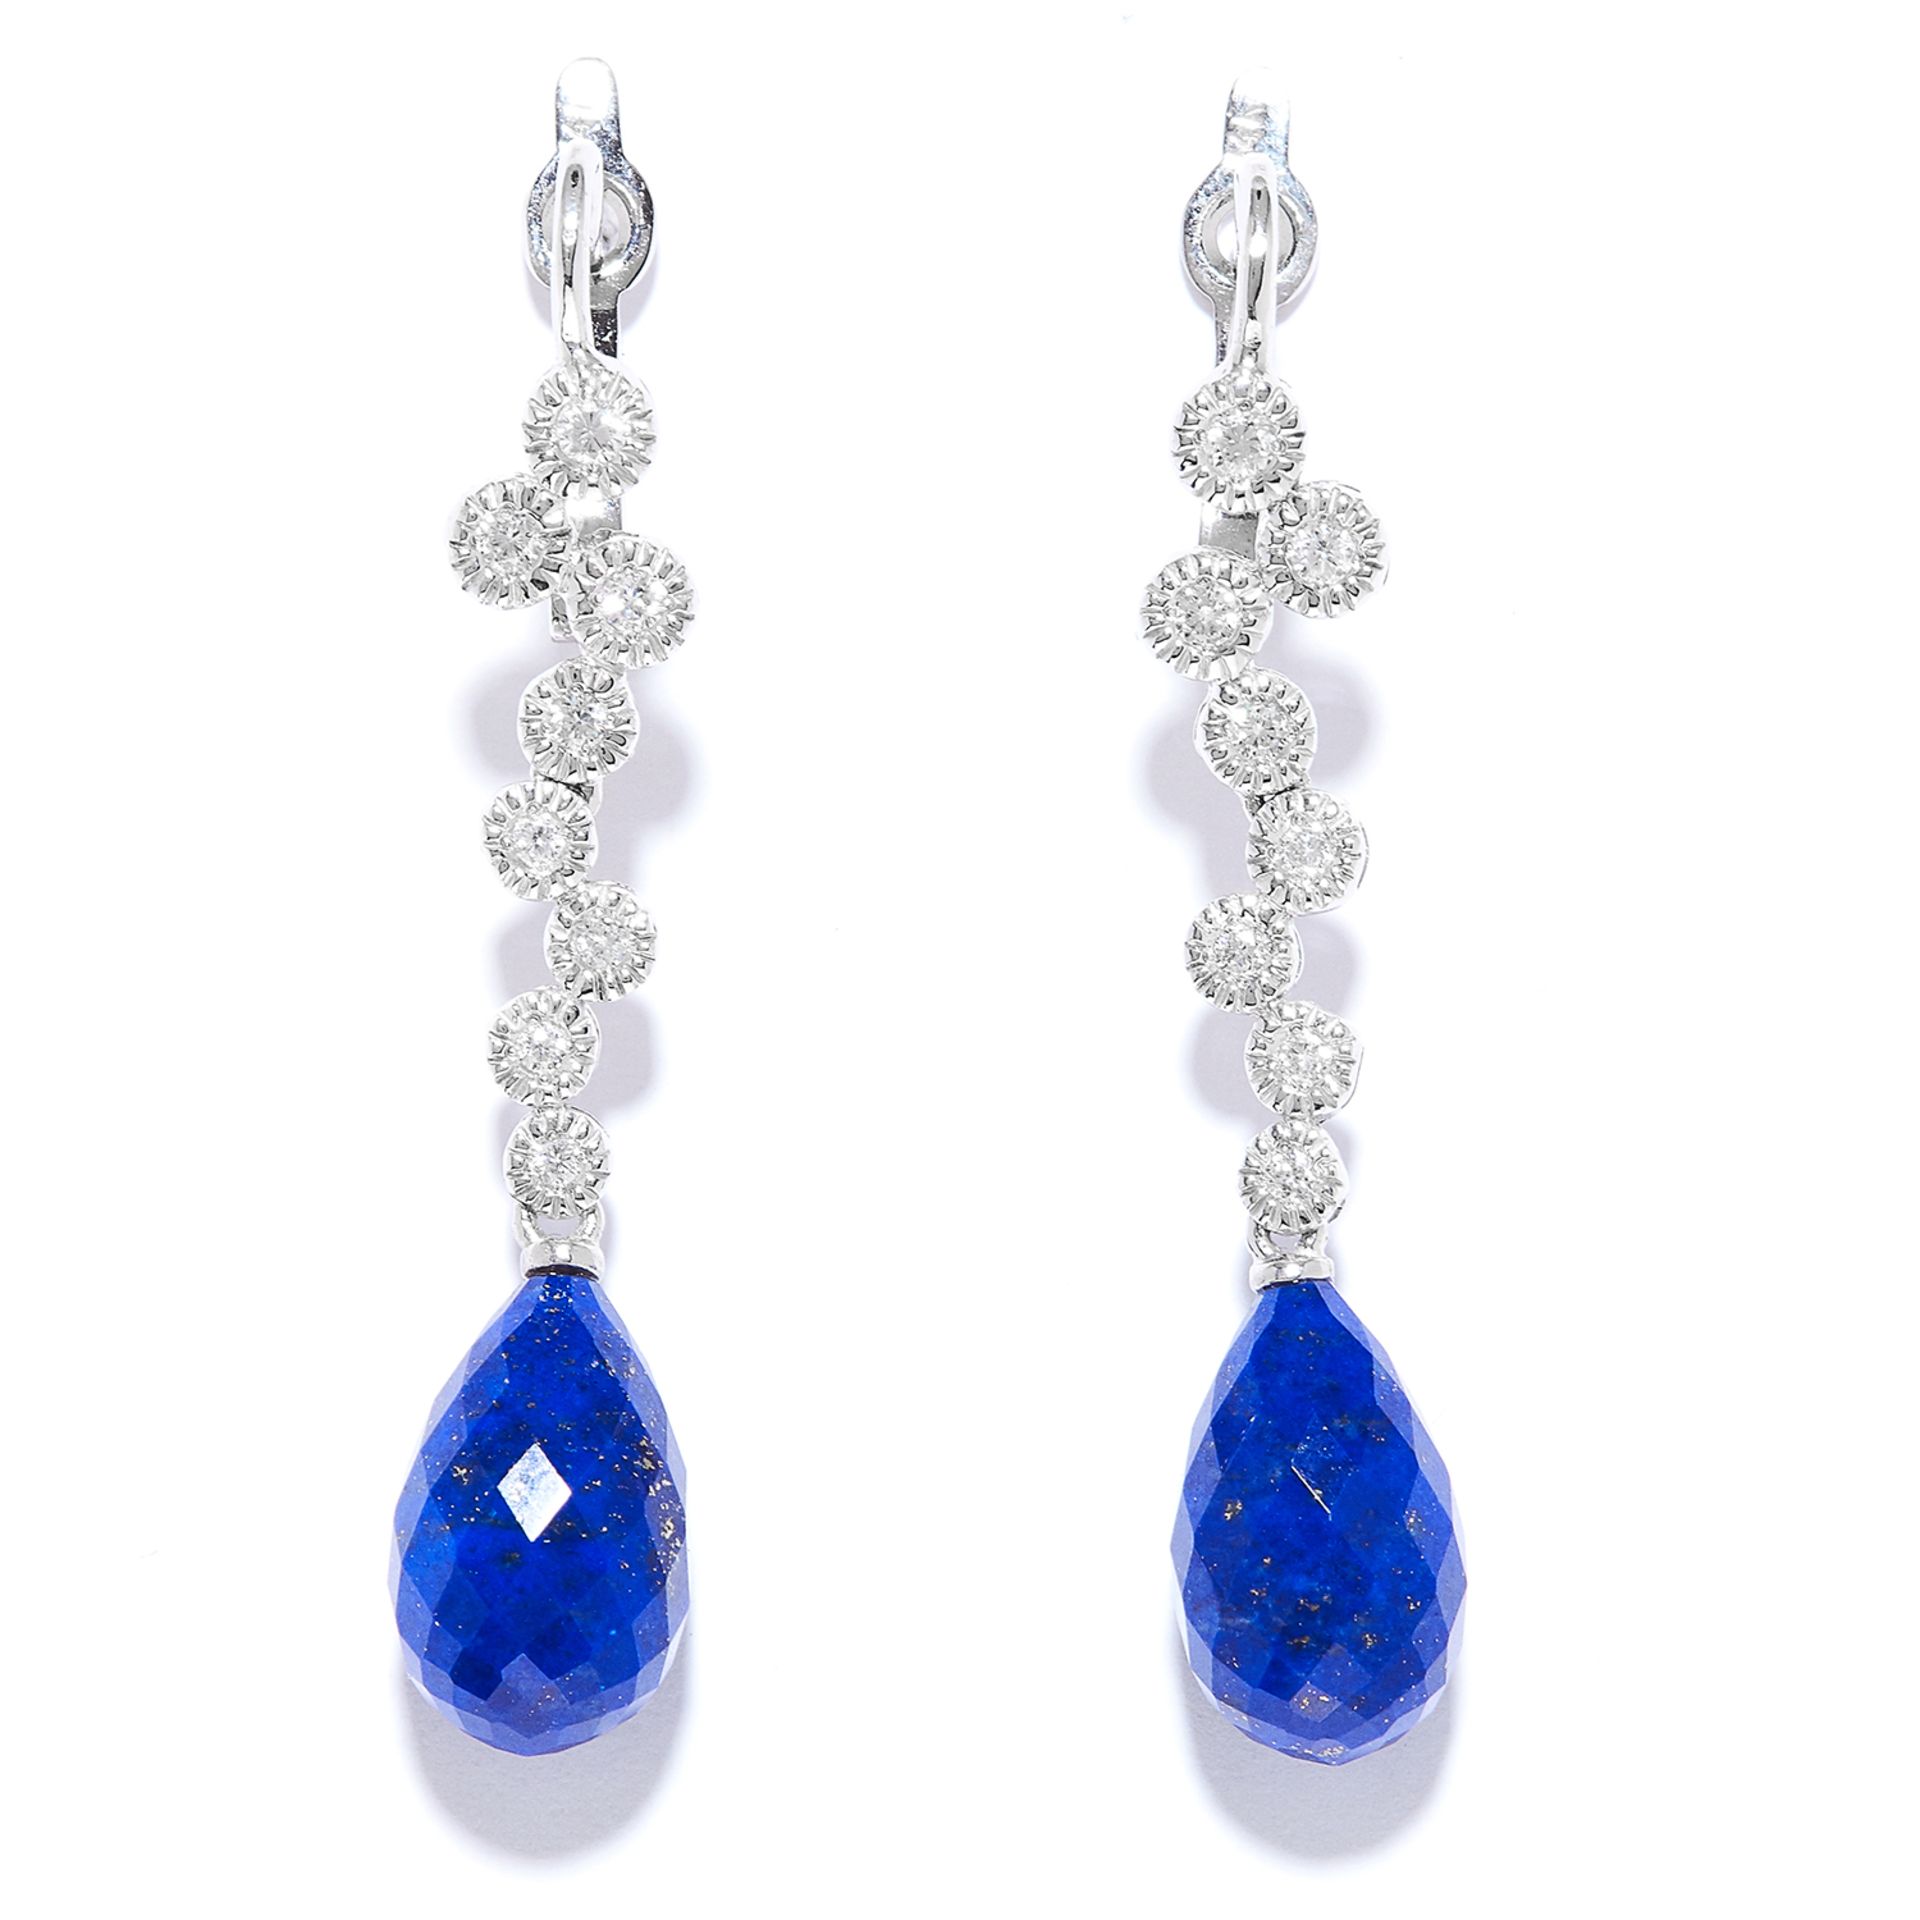 LAPIS LAZULI AND DIAMOND EARRINGS in 14ct white gold, each set with a lapis lazuli briolette below a